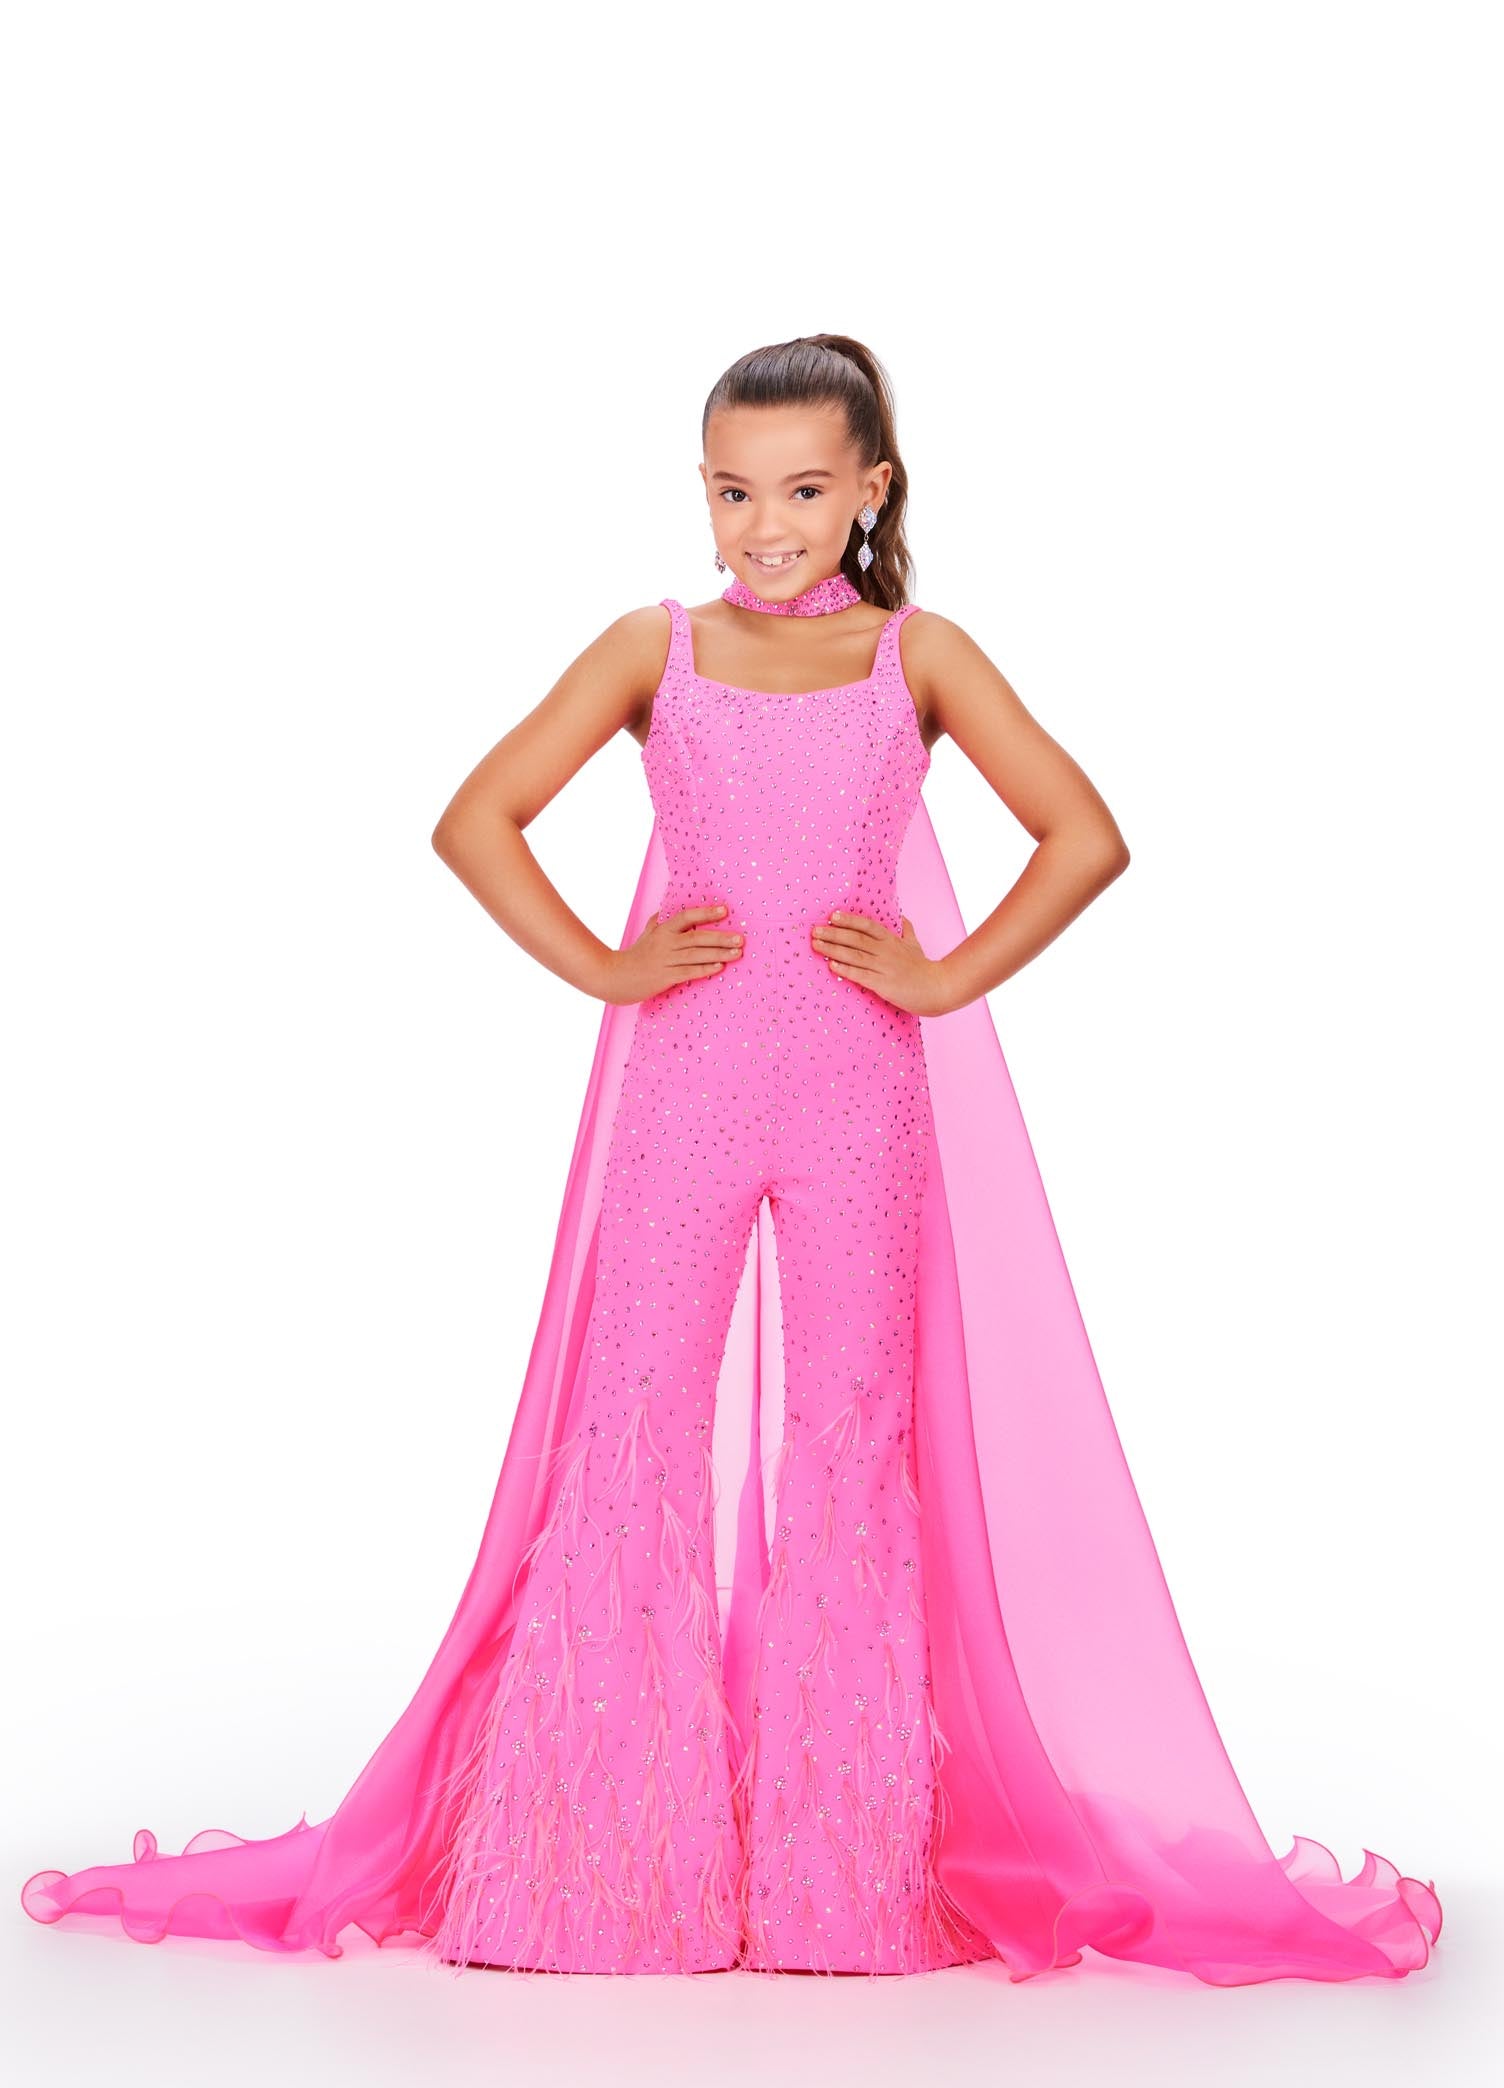 Ashley Lauren Kids 8210 Long Girls Pageant Jumpsuit with Crystal embellishments and a scoop neckline. Feather Embellished flared Bell Bottoms with a choker embellished with crystals and organza Cape. Feel like a popstar in this stunning jumpsuit! Covered in sparkly press on stones, this jumpsuit has a detached choker and organza cape. With feathers cascading down the pants, this jumpsuit is going to make a statement!  Sizes: 4-16  Colors: Aqua, Hot Pink, Red